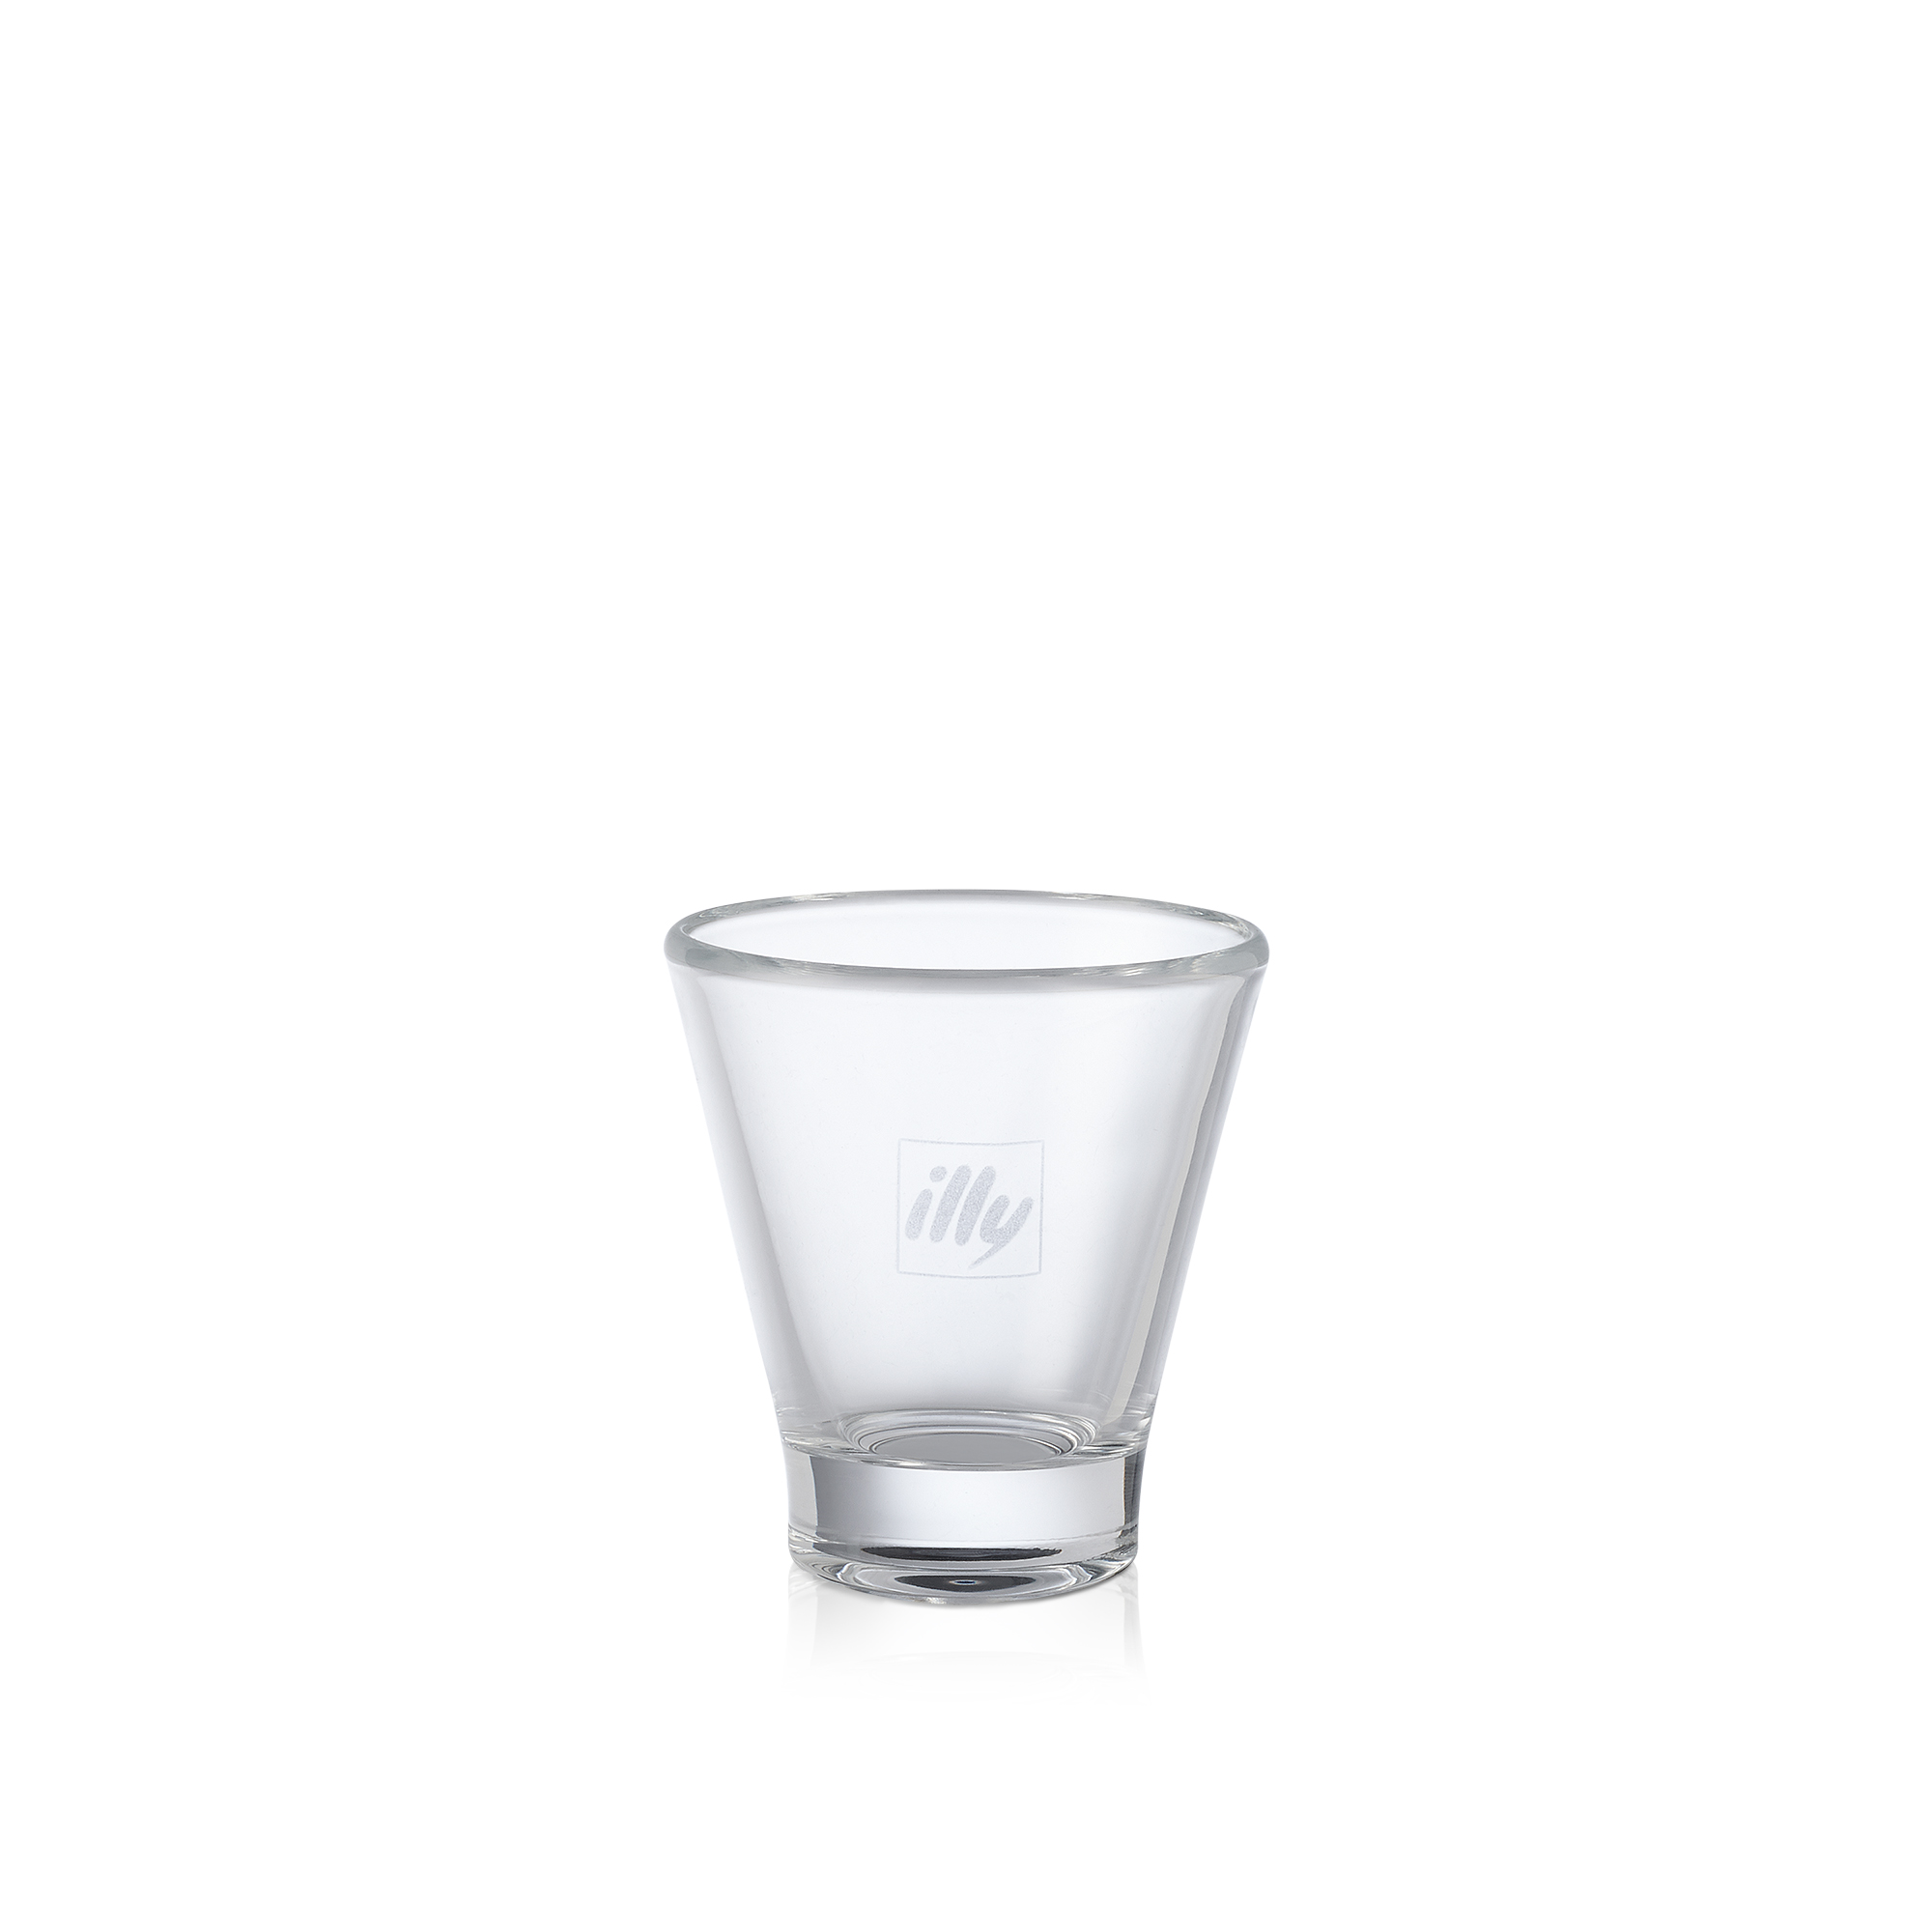 https://www.illy.com/on/demandware.static/-/Sites-masterCatalog_illycaffe/default/dw6289e480/products/Cups/Accessories/B1733_cups_accessories_4-marocchino_illy-shop/B1733_Bicchieri%20Marocchino.jpg